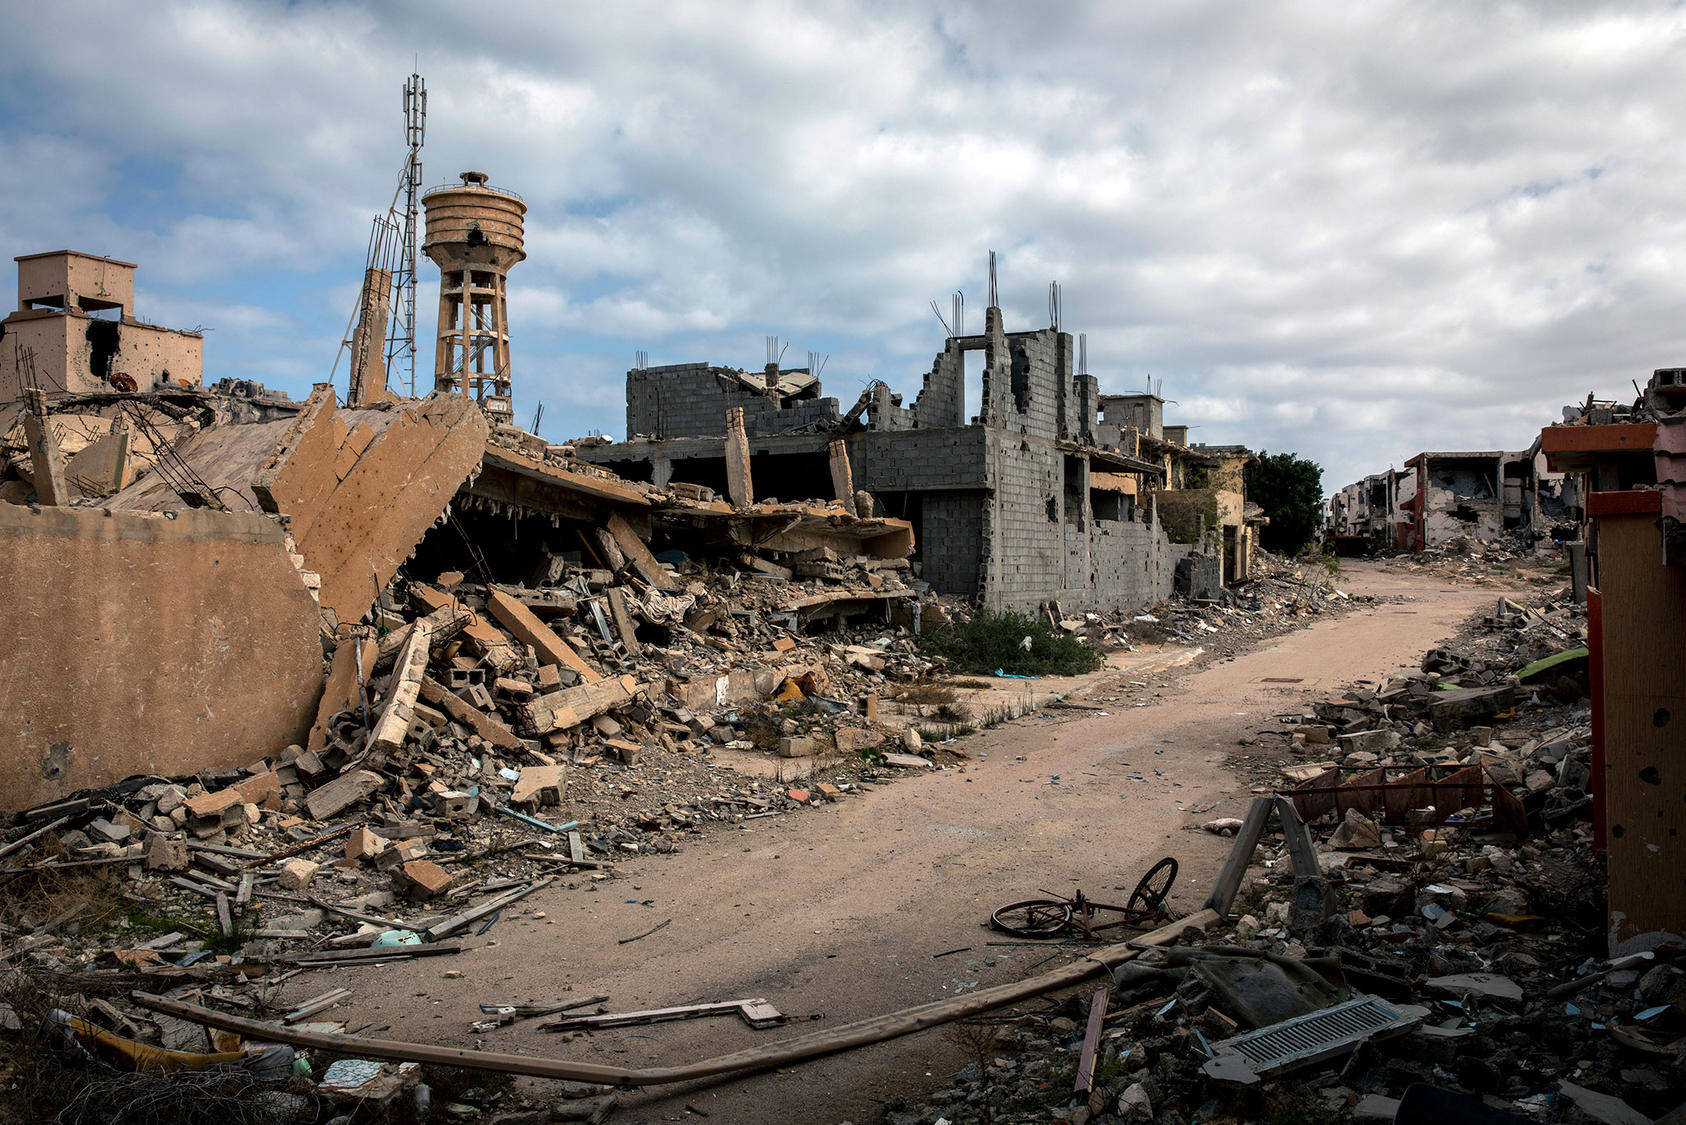 Sirte, the former hometown and stronghold of Muammar Qaddafi, stood in ruins in 2020 after battles between Libyan factions. In other locales, local Libyan peacebuilders have been able to halt or avert warfare. (Ivor Prickett/The New York Times)